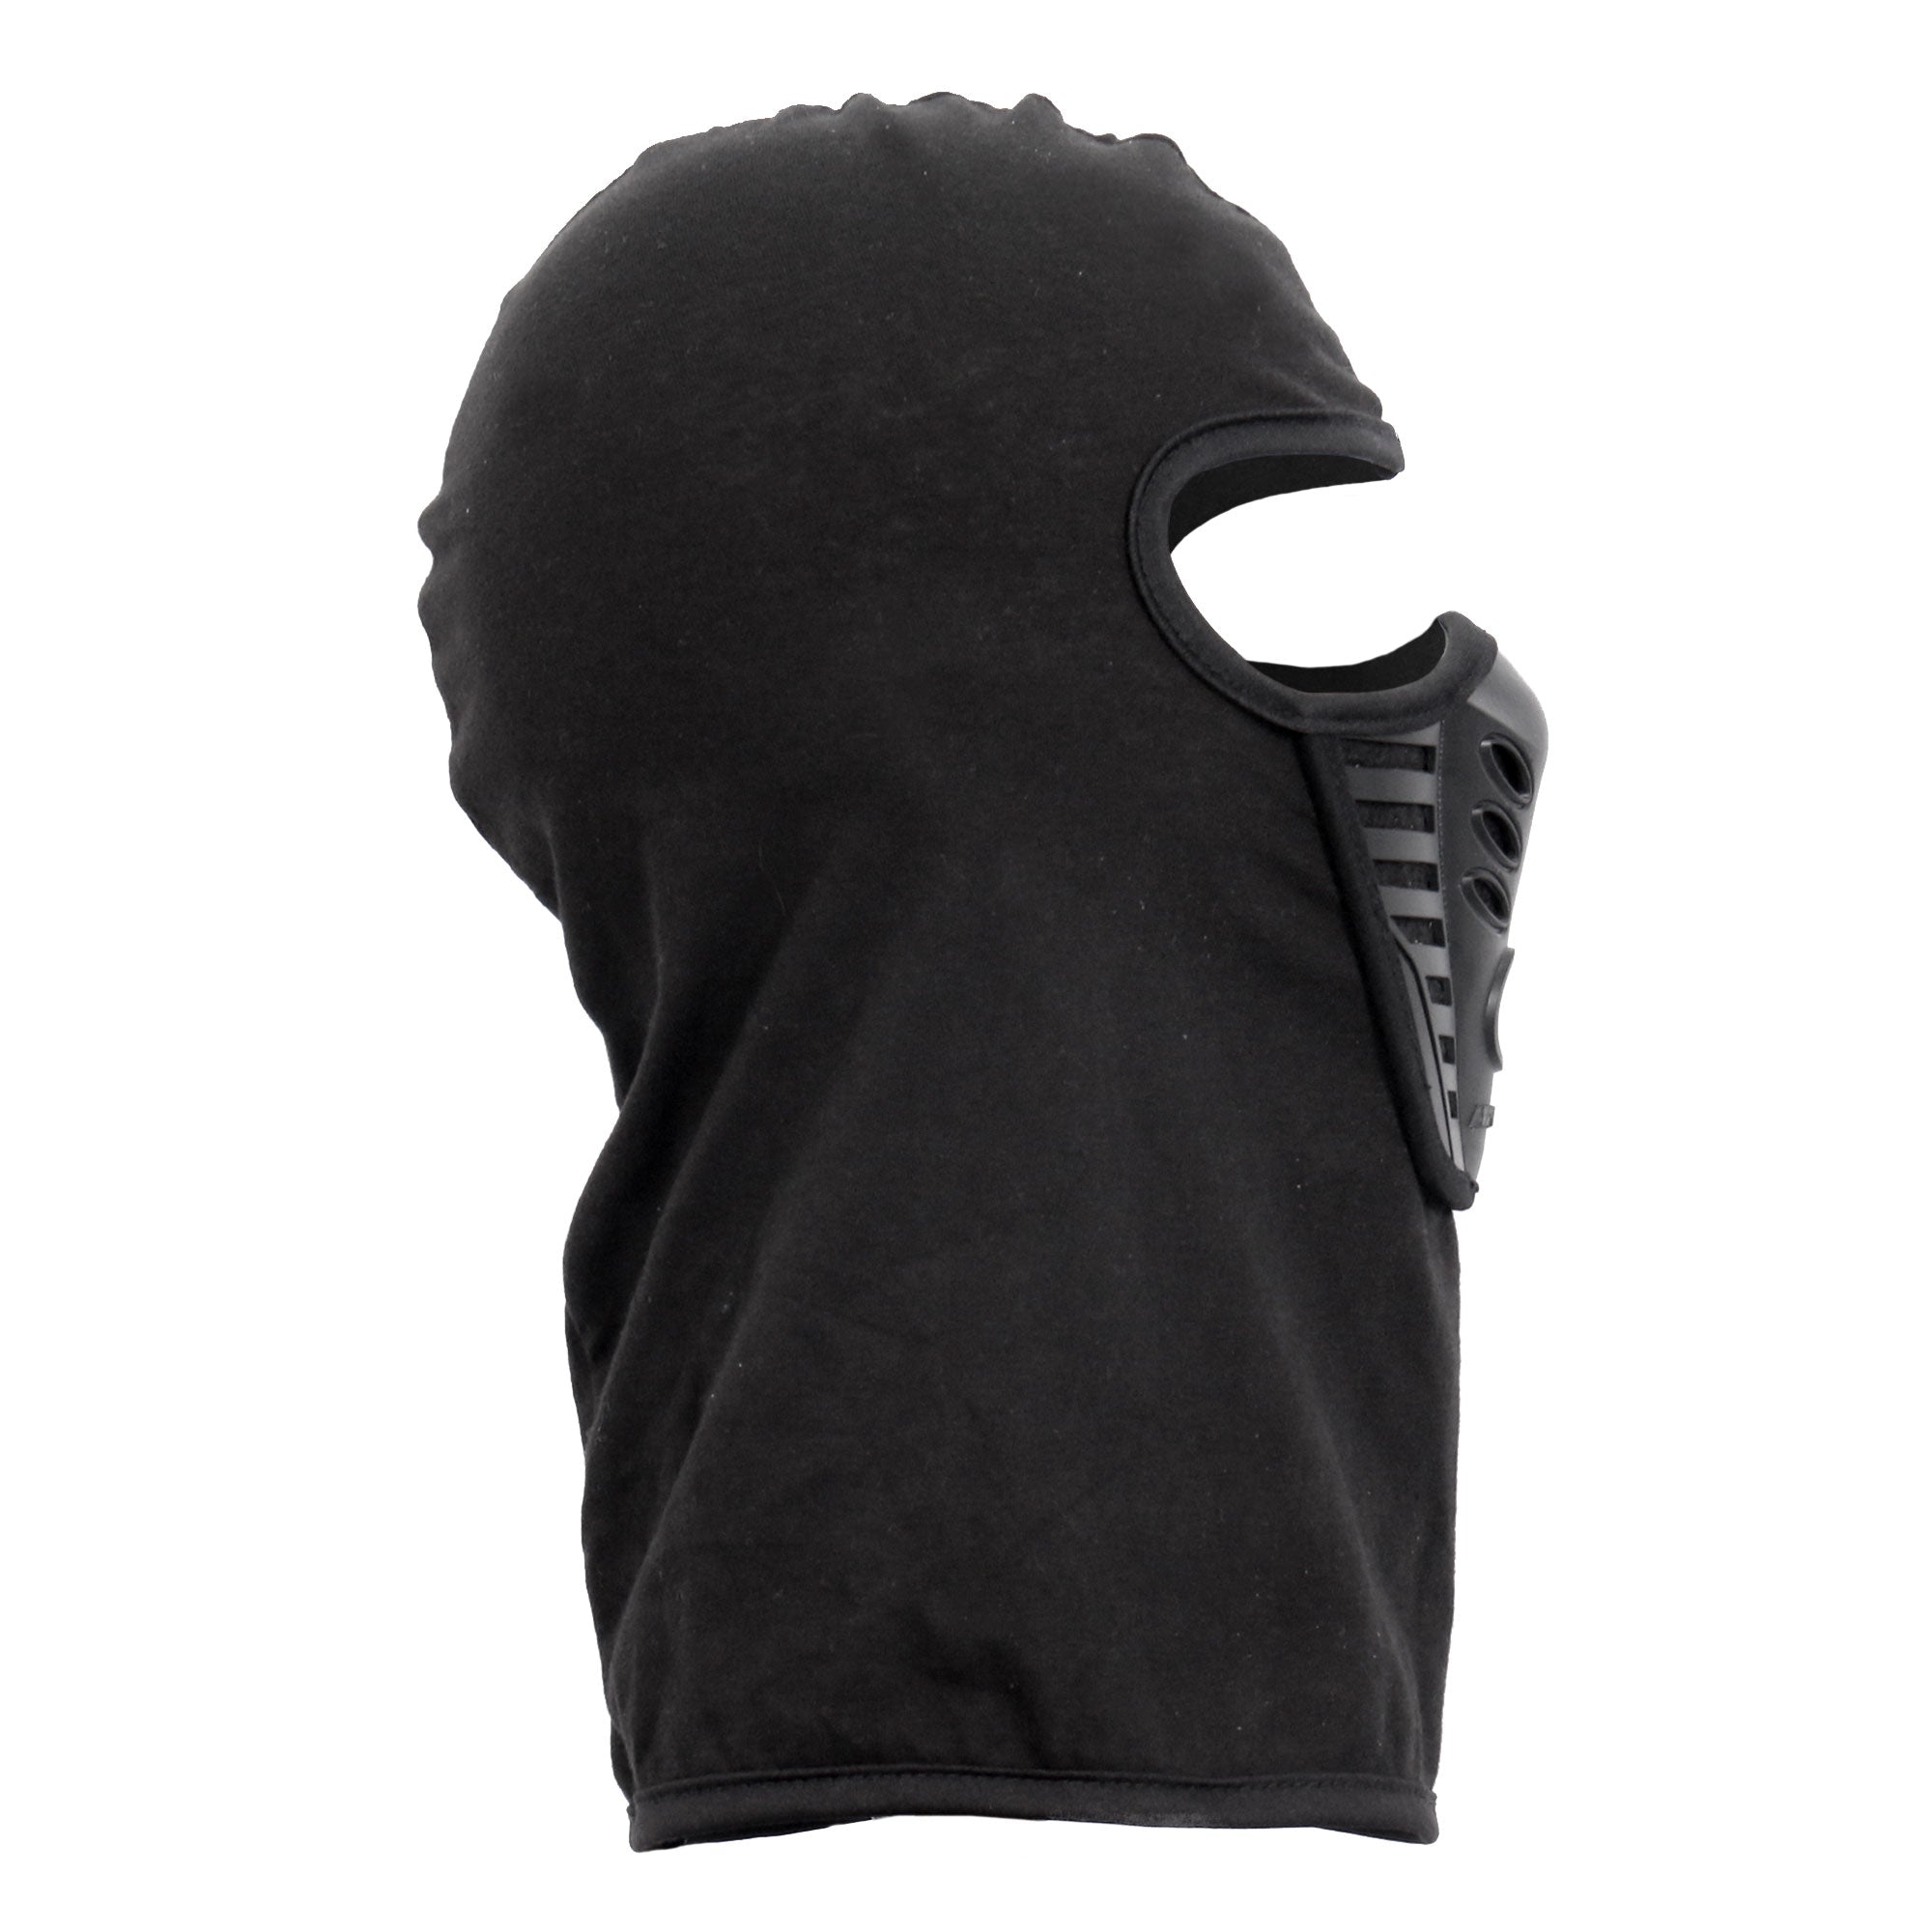 Hot Leathers Black Face Mask with Mouth Vent